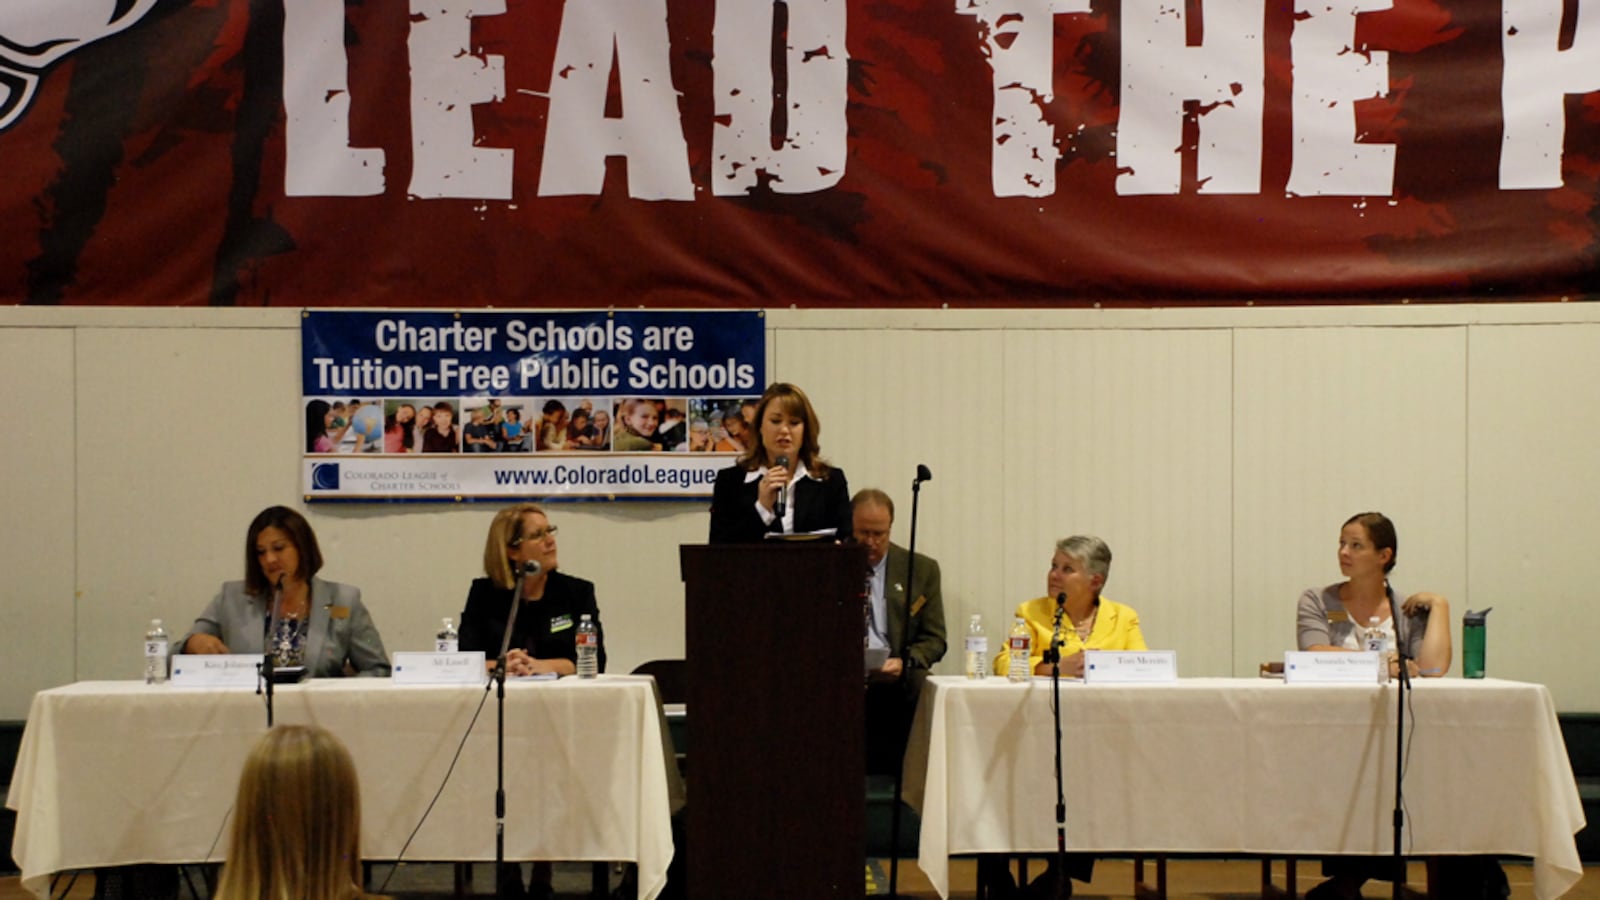 Candidates for the Jefferson County school board answered questions at a forum hosted by the Colorado League of Charter Schools.